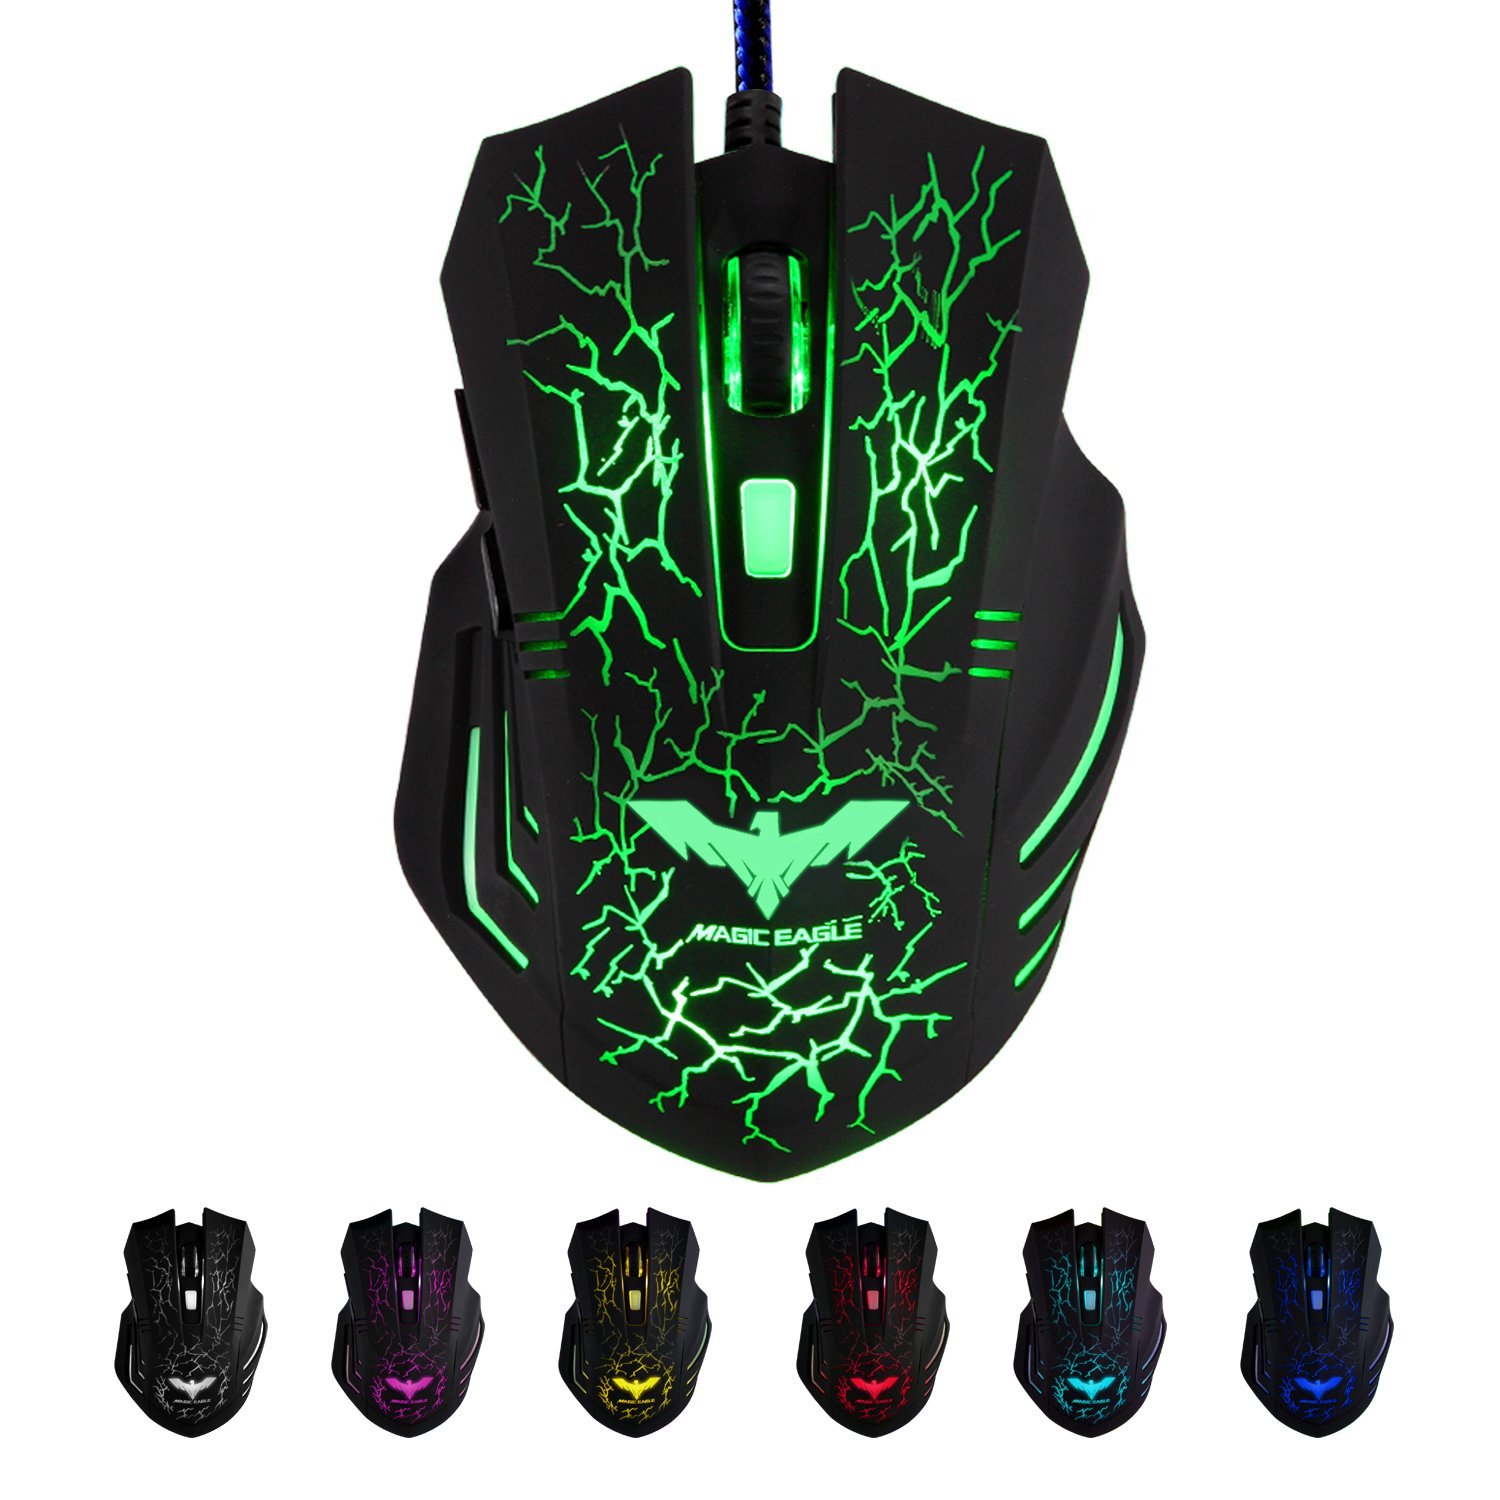 magic eagle gaming mouse disable light